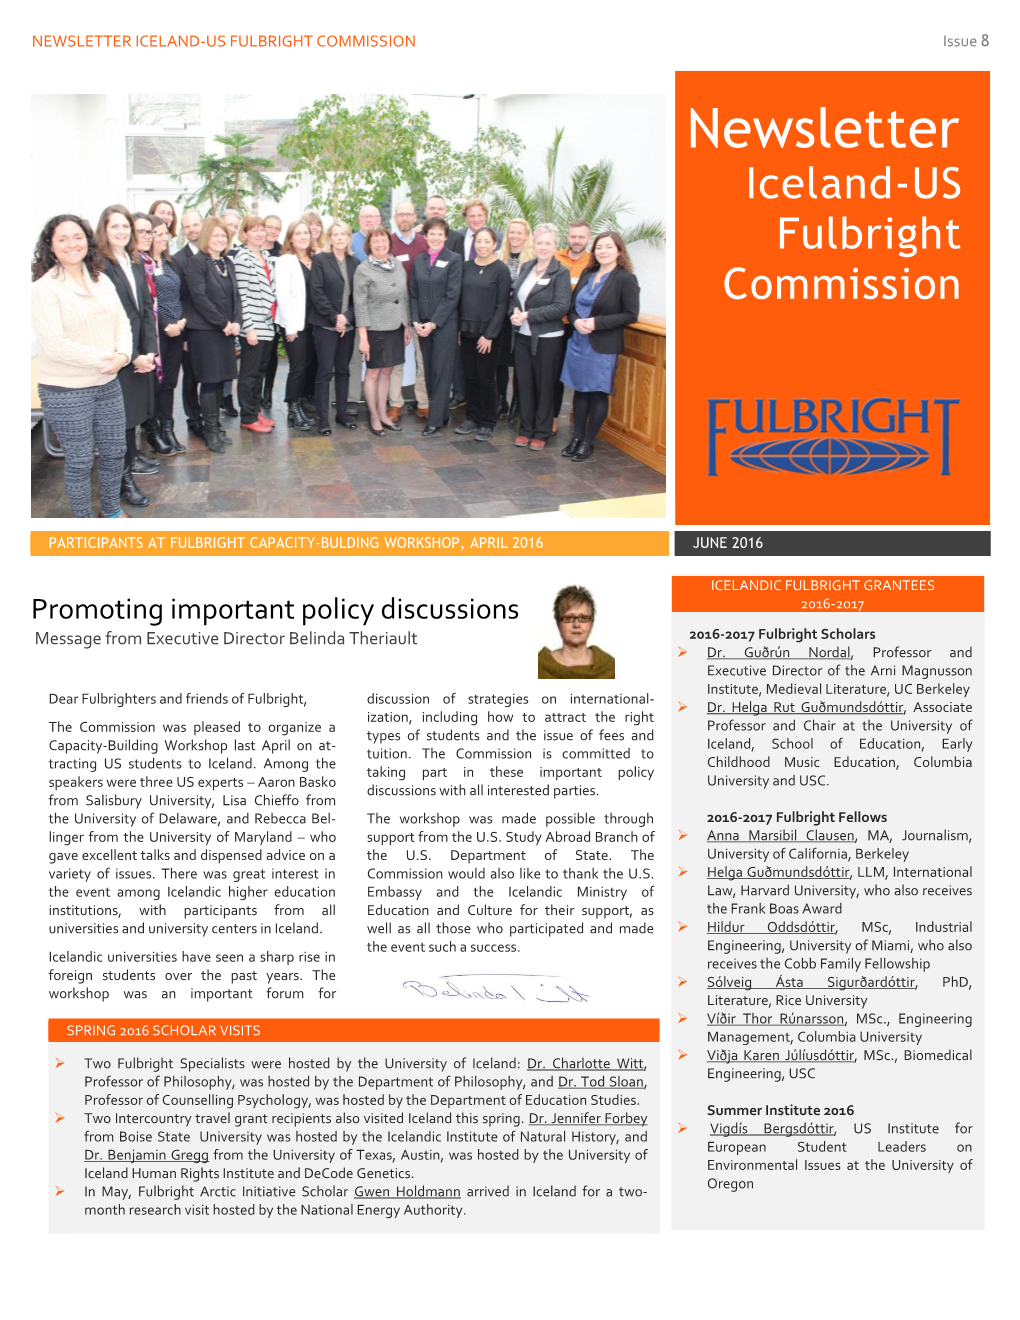 NEWSLETTER ICELAND-US FULBRIGHT COMMISSION Issue 8